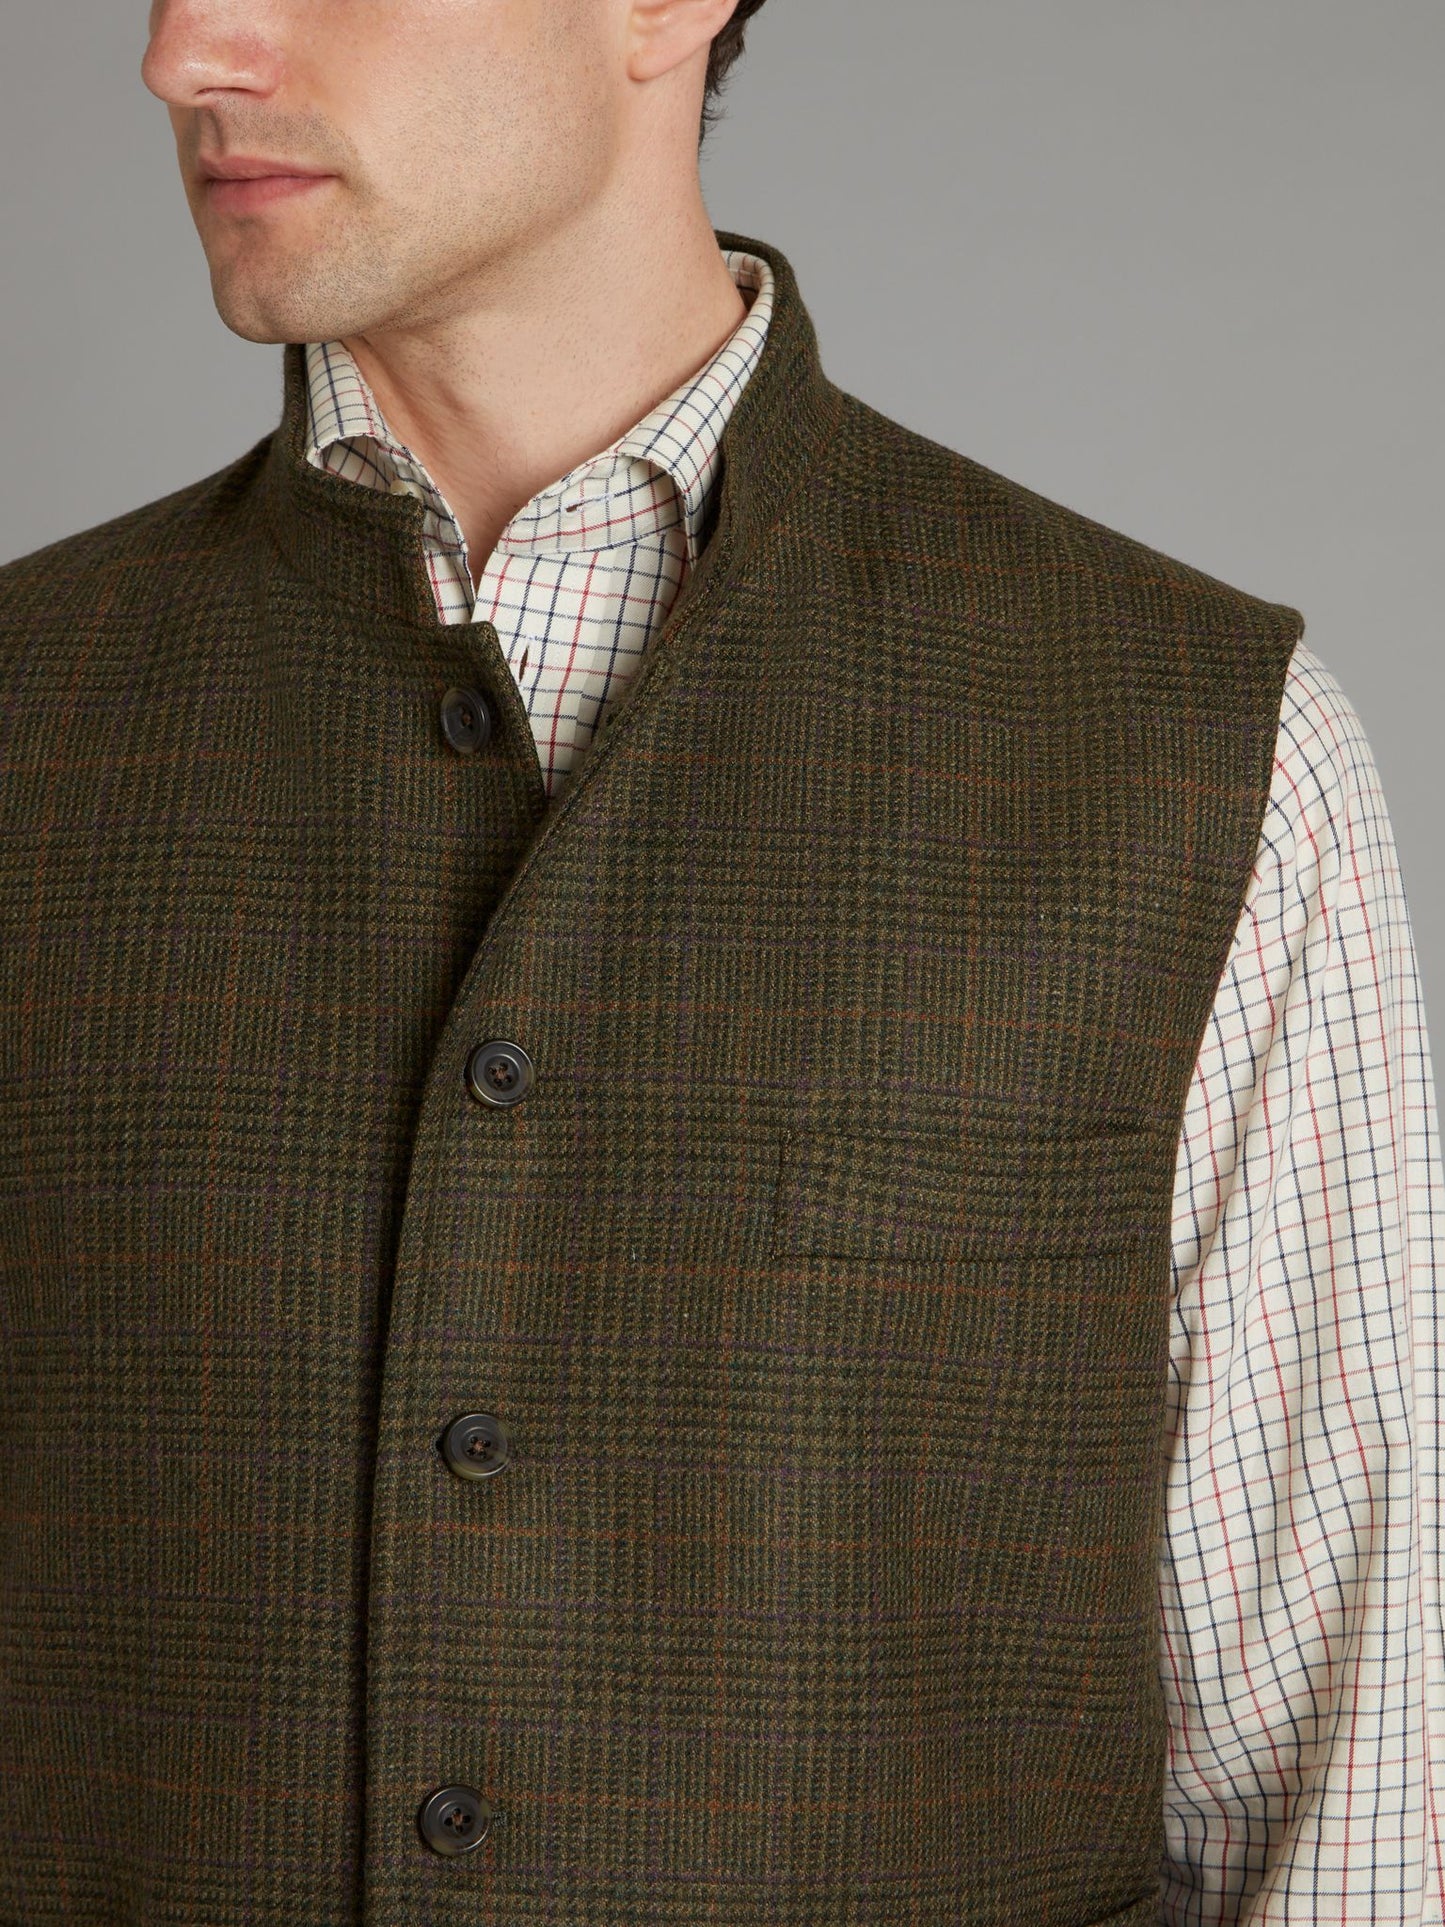 Gilet - Limited-Edition Tweed